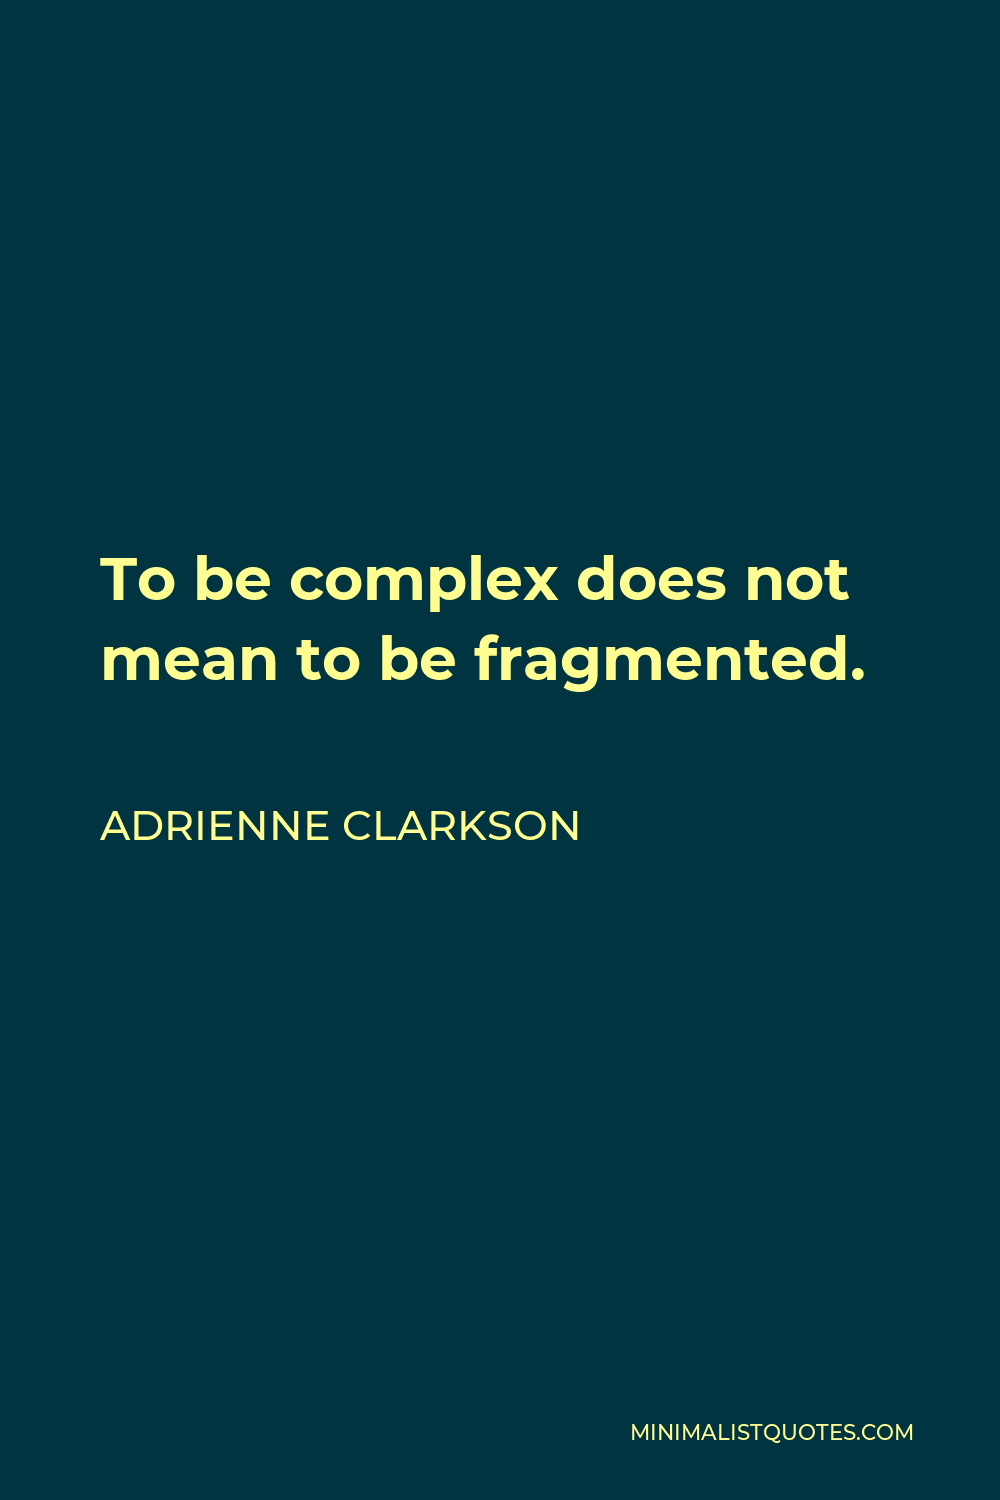 Adrienne Clarkson Quote - To be complex does not mean to be fragmented.